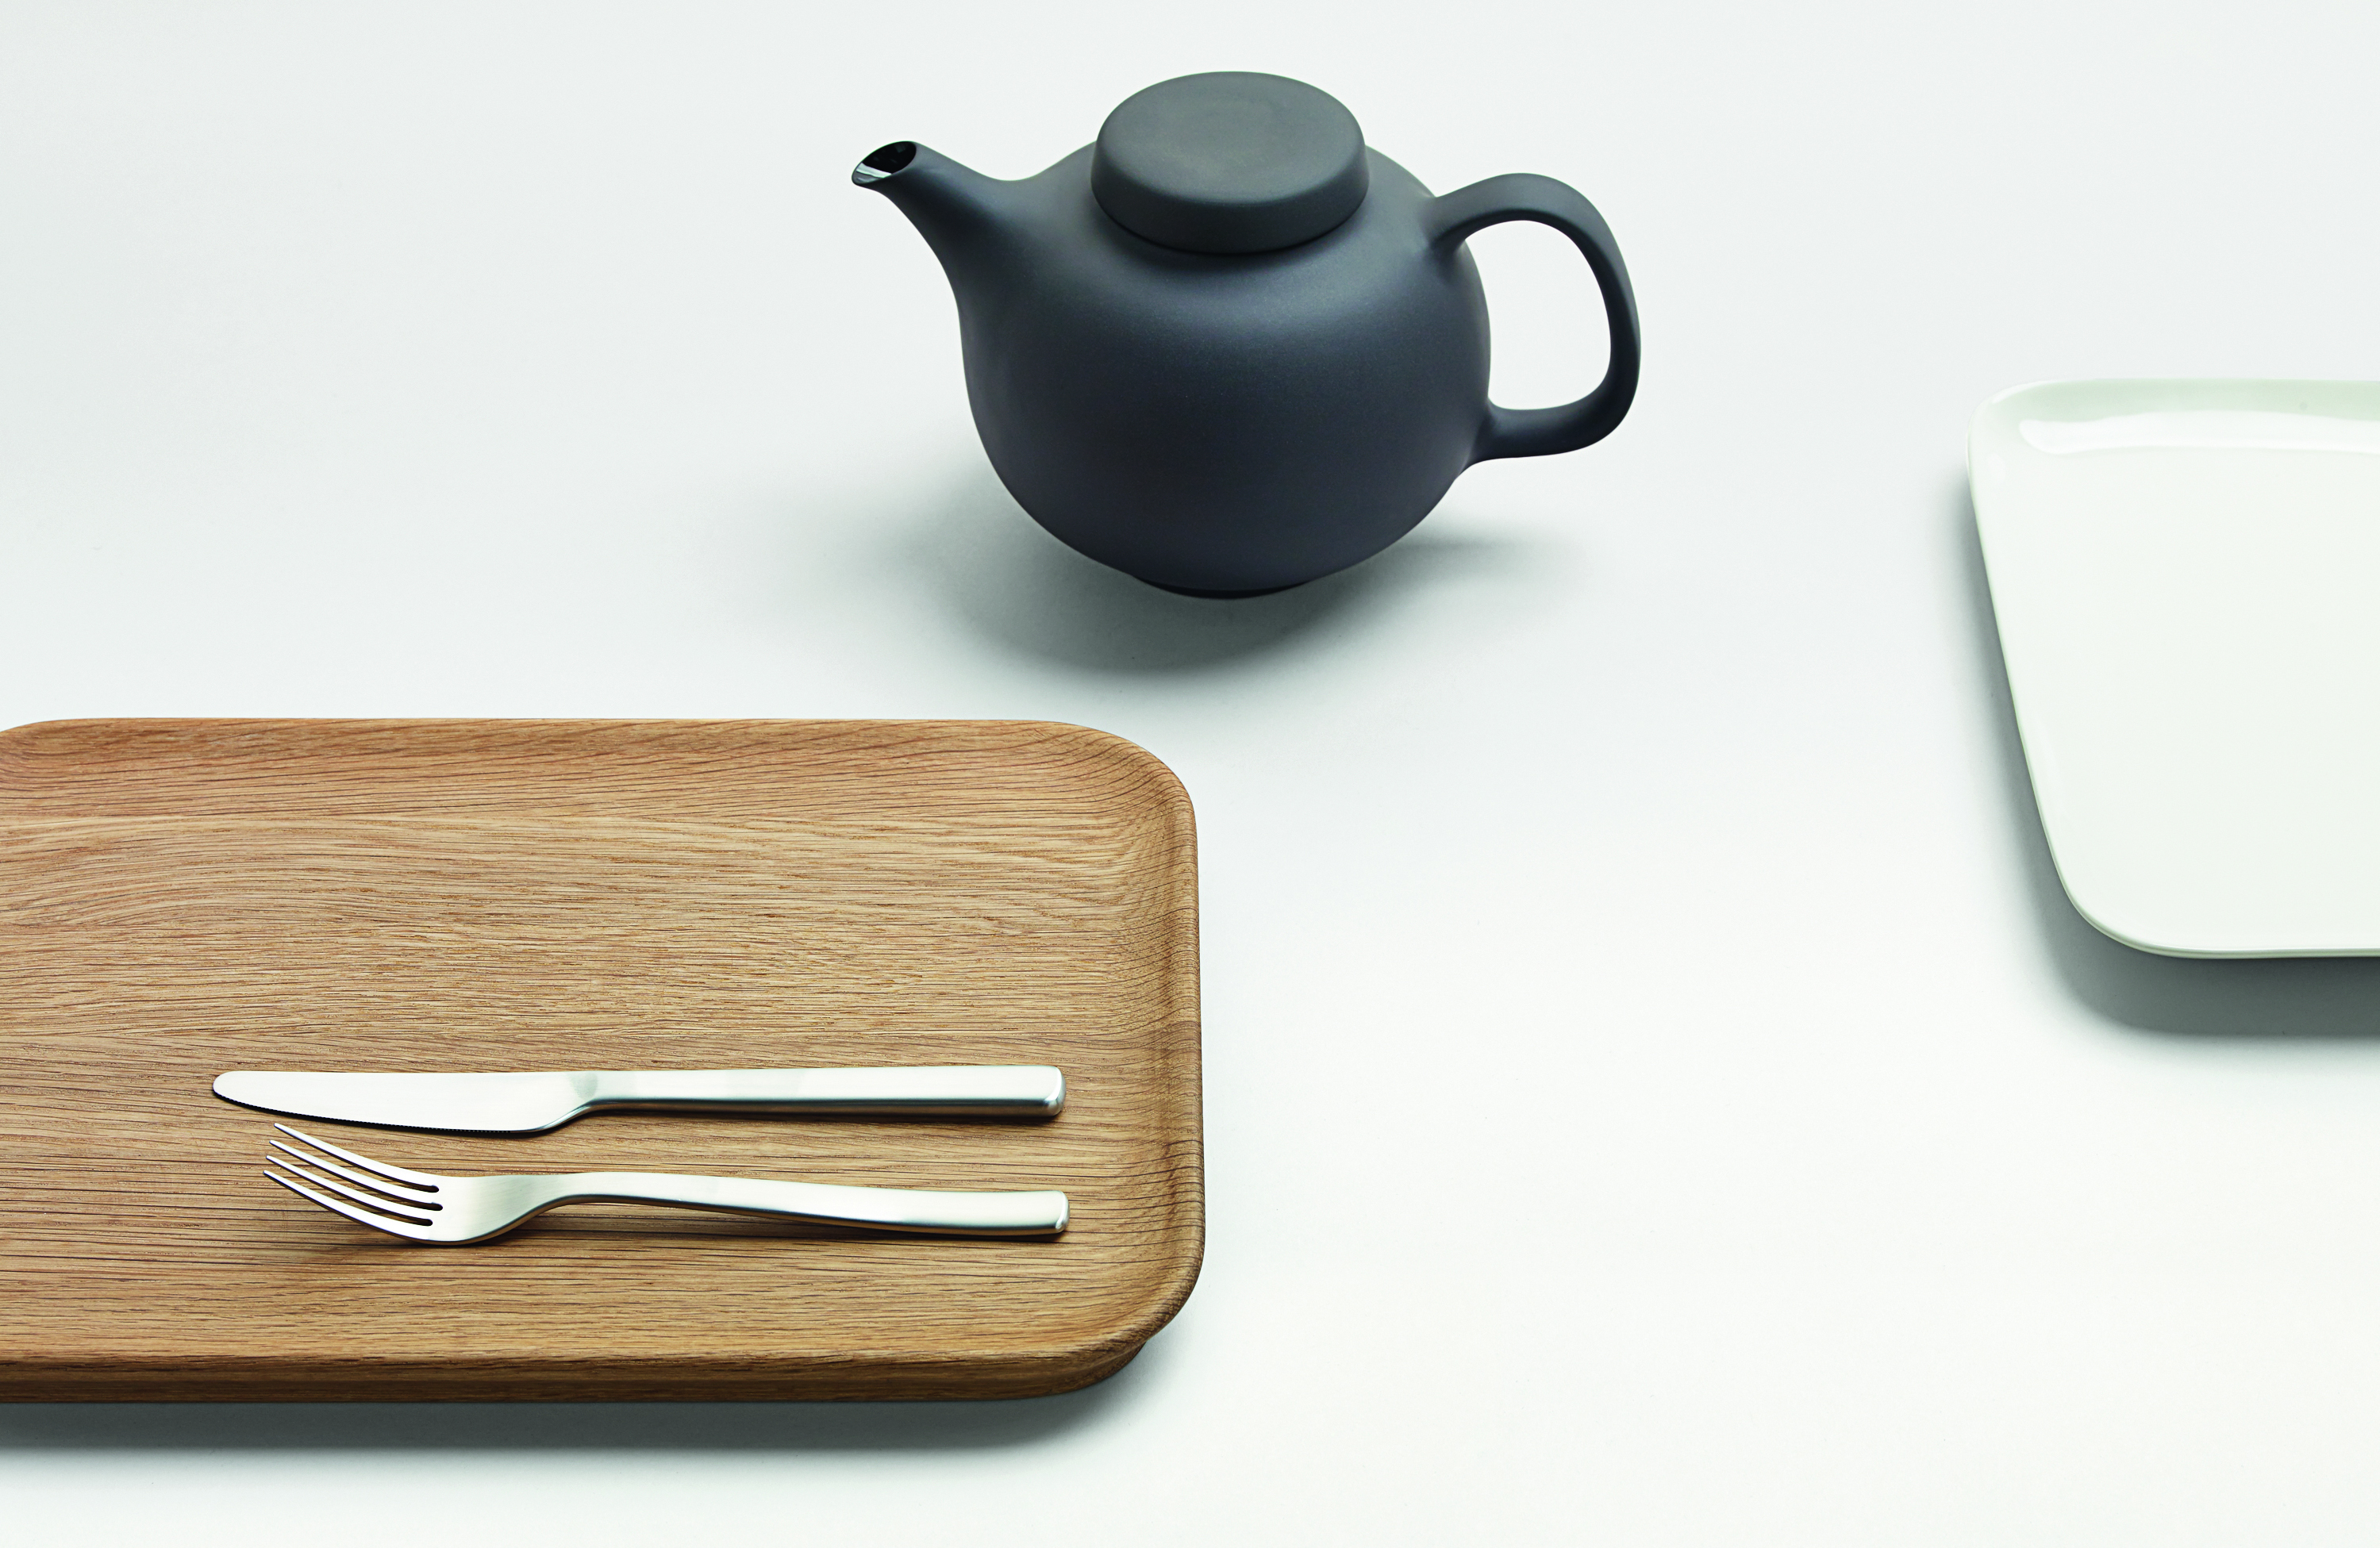 Olio tableware by Barber Osgerby, from our book Barber Osgerby, Projects